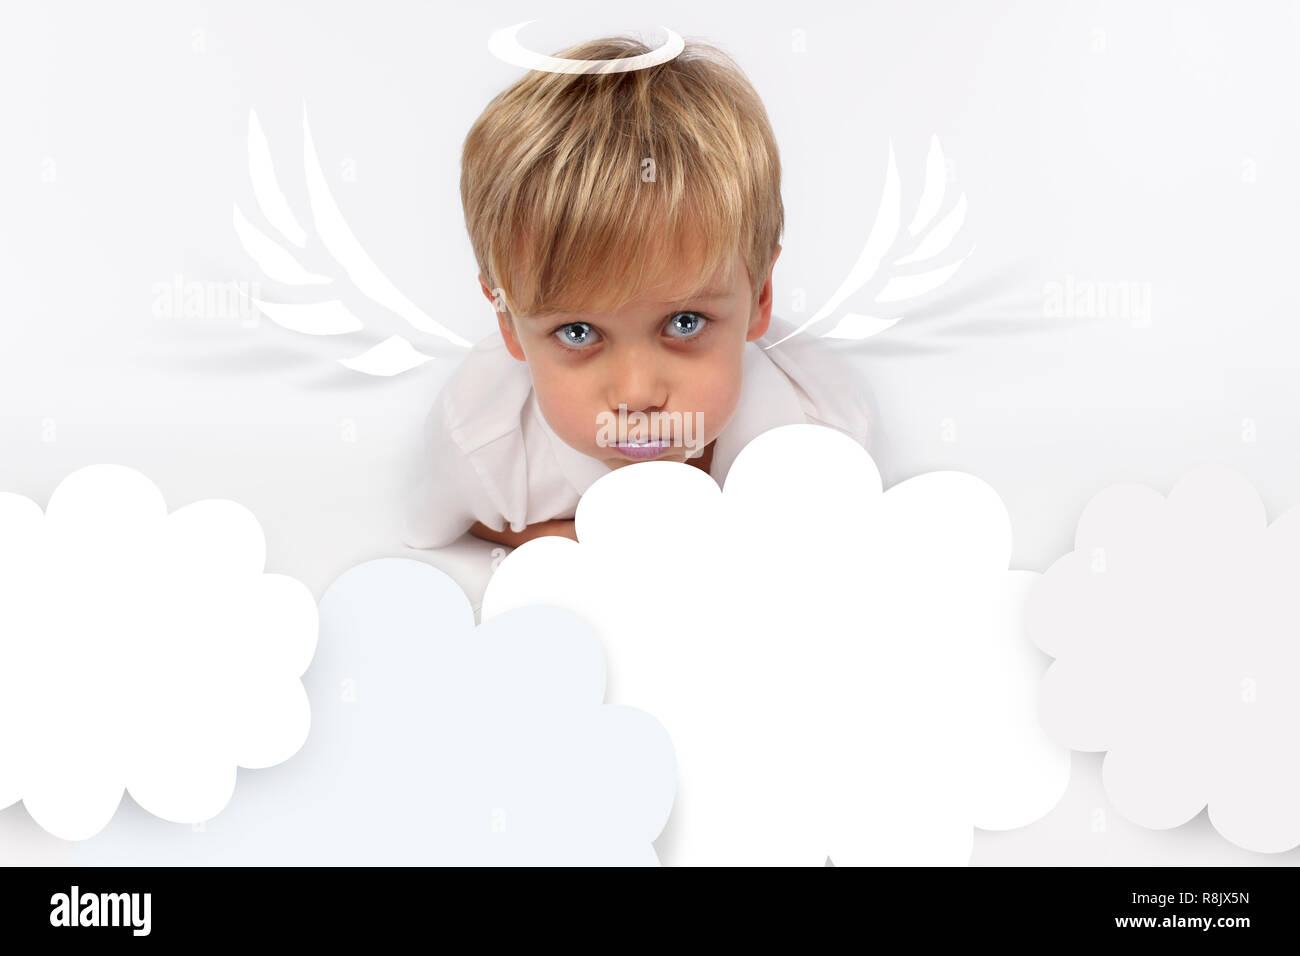 Naughty or good child for Christmas card? PF or letter to Santa-Claus for Christmas. Little child boy appearing as an adorable angelic devil Stock Photo